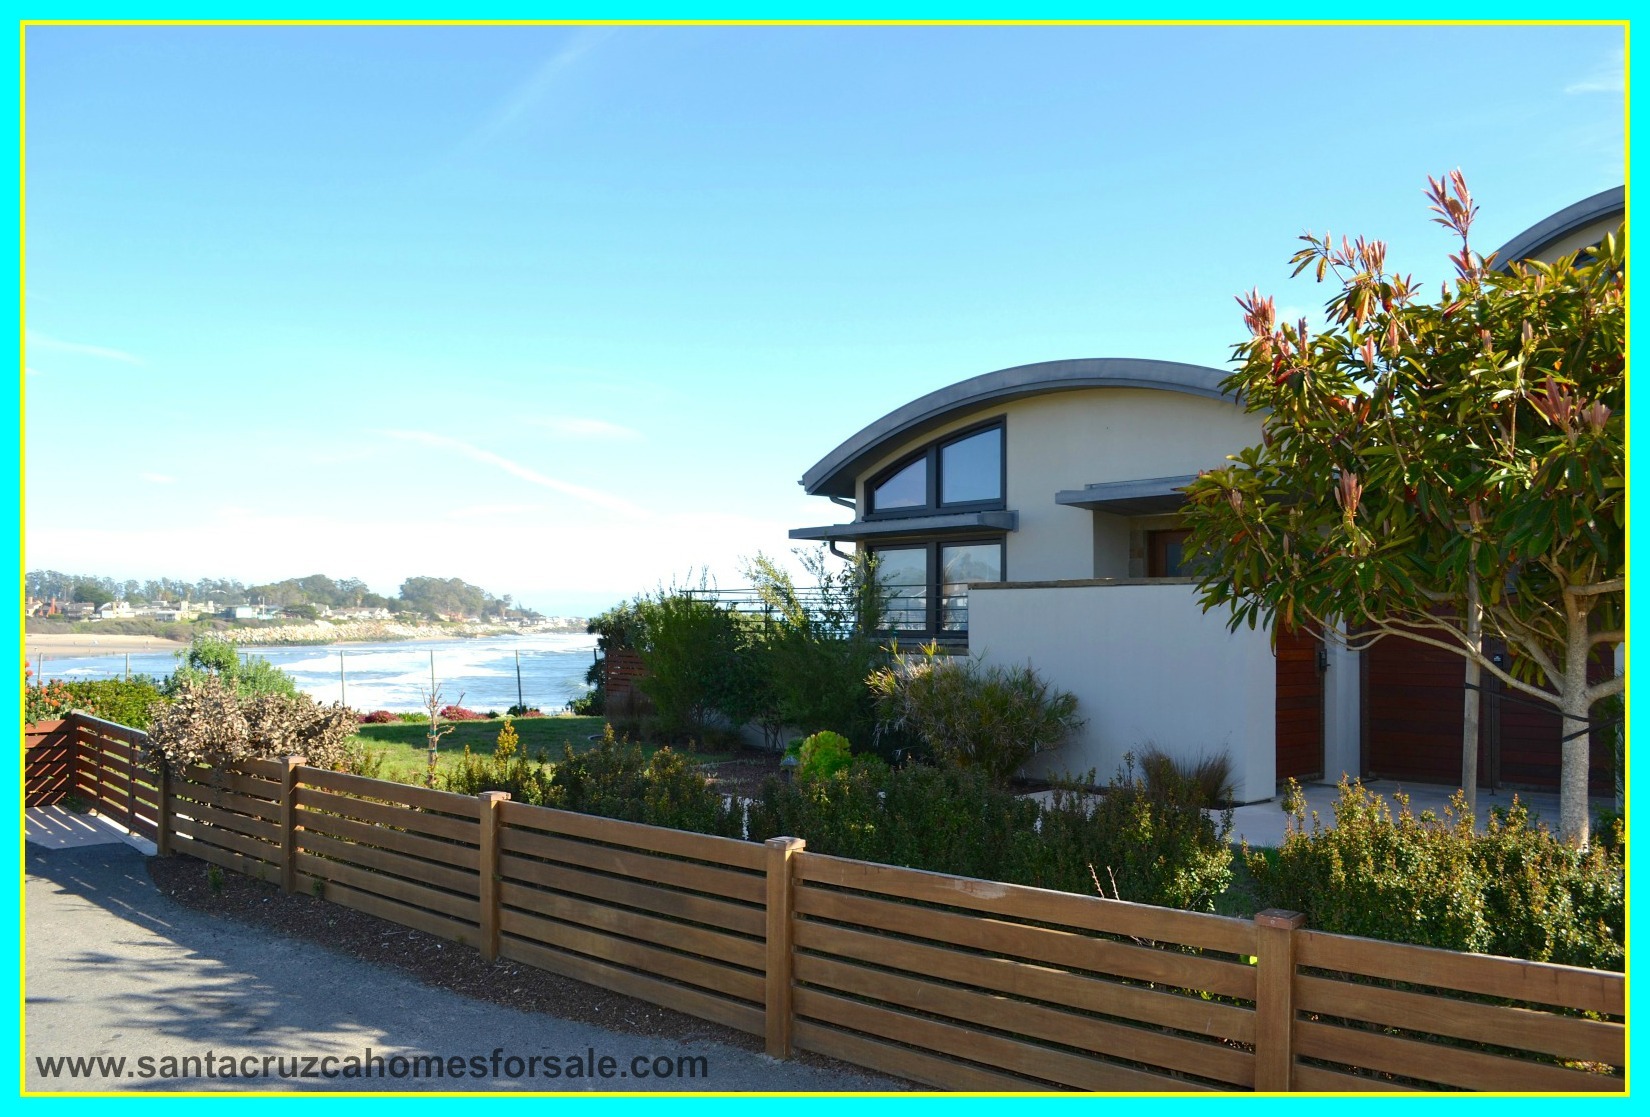 If you're looking for your dream home with ocean views, then check this out!